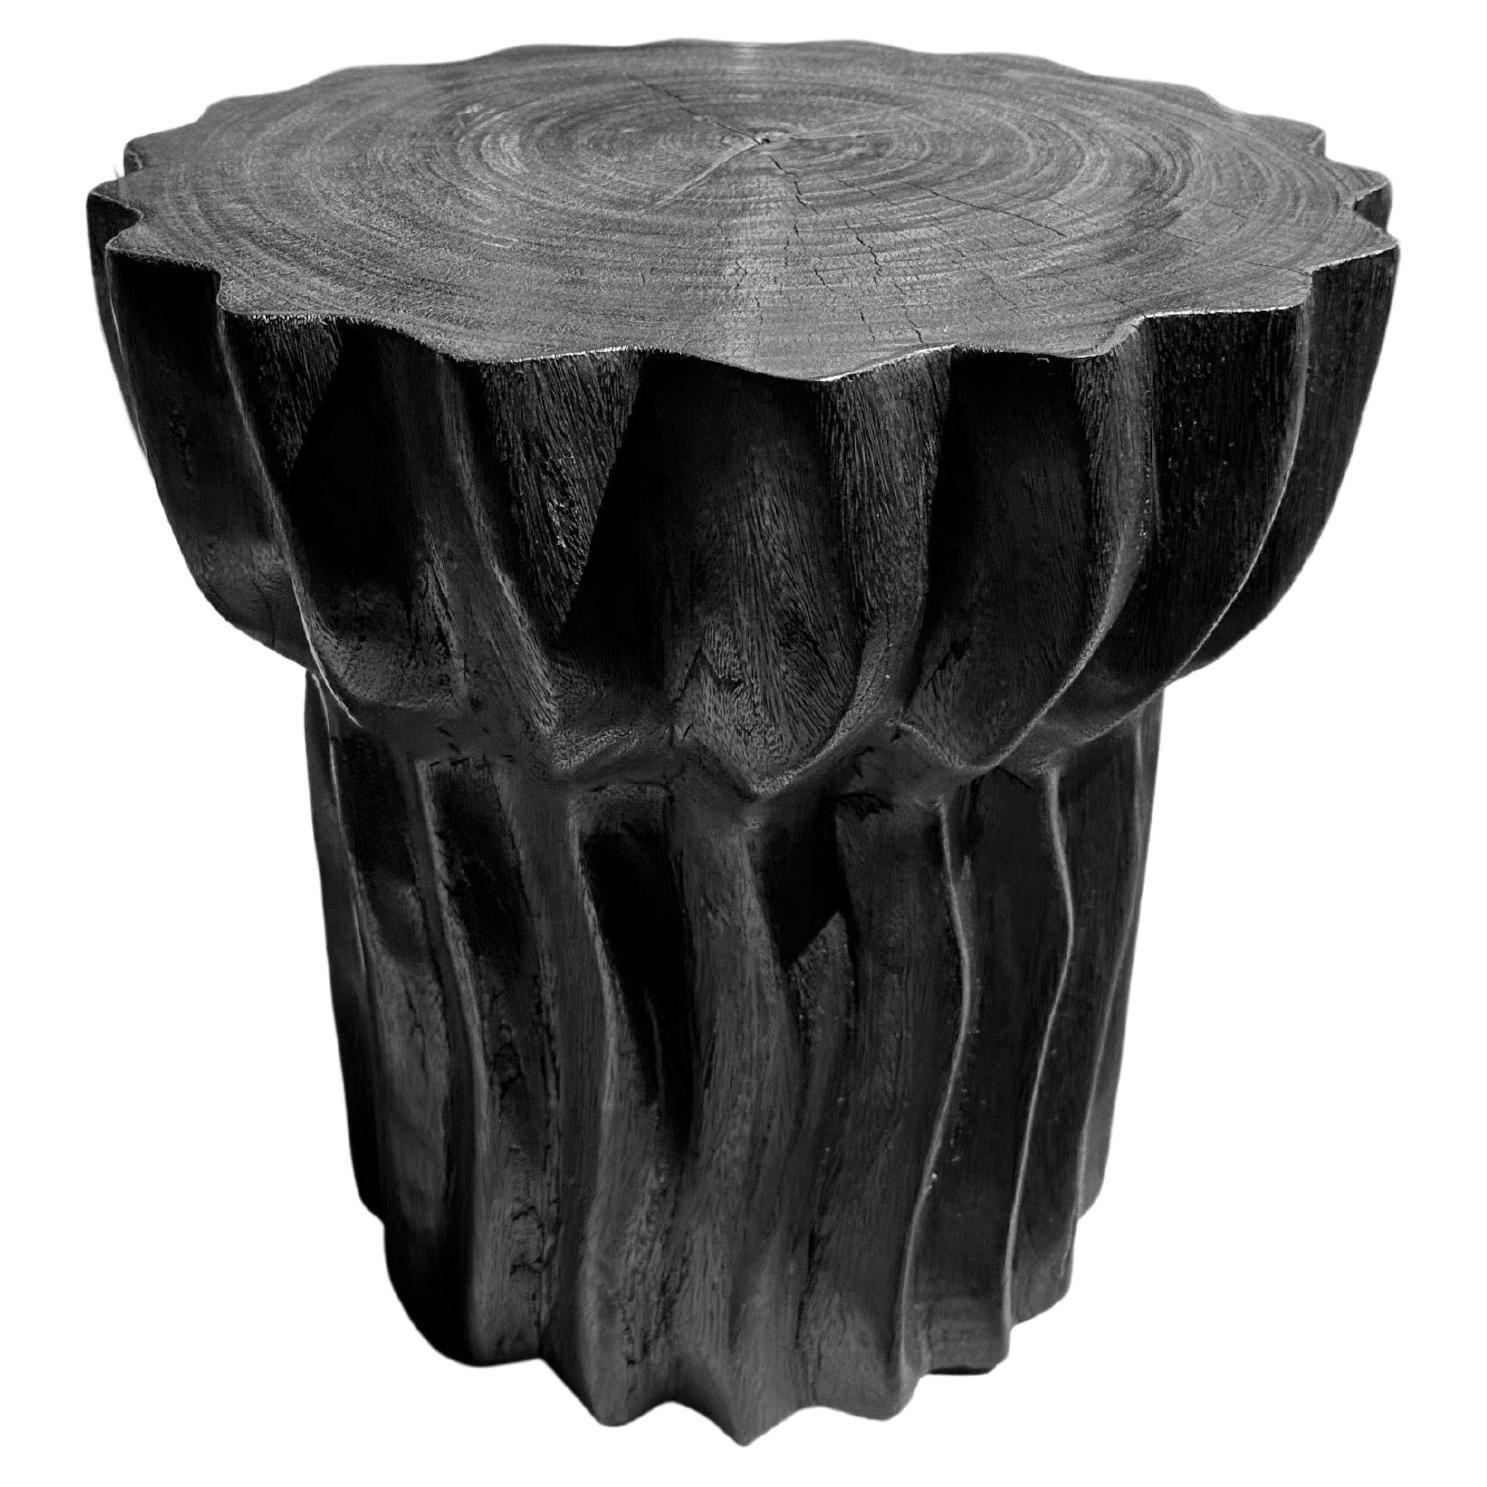 Solid Mango Wood Side Table with Burnt Finish, Modern Organic For Sale